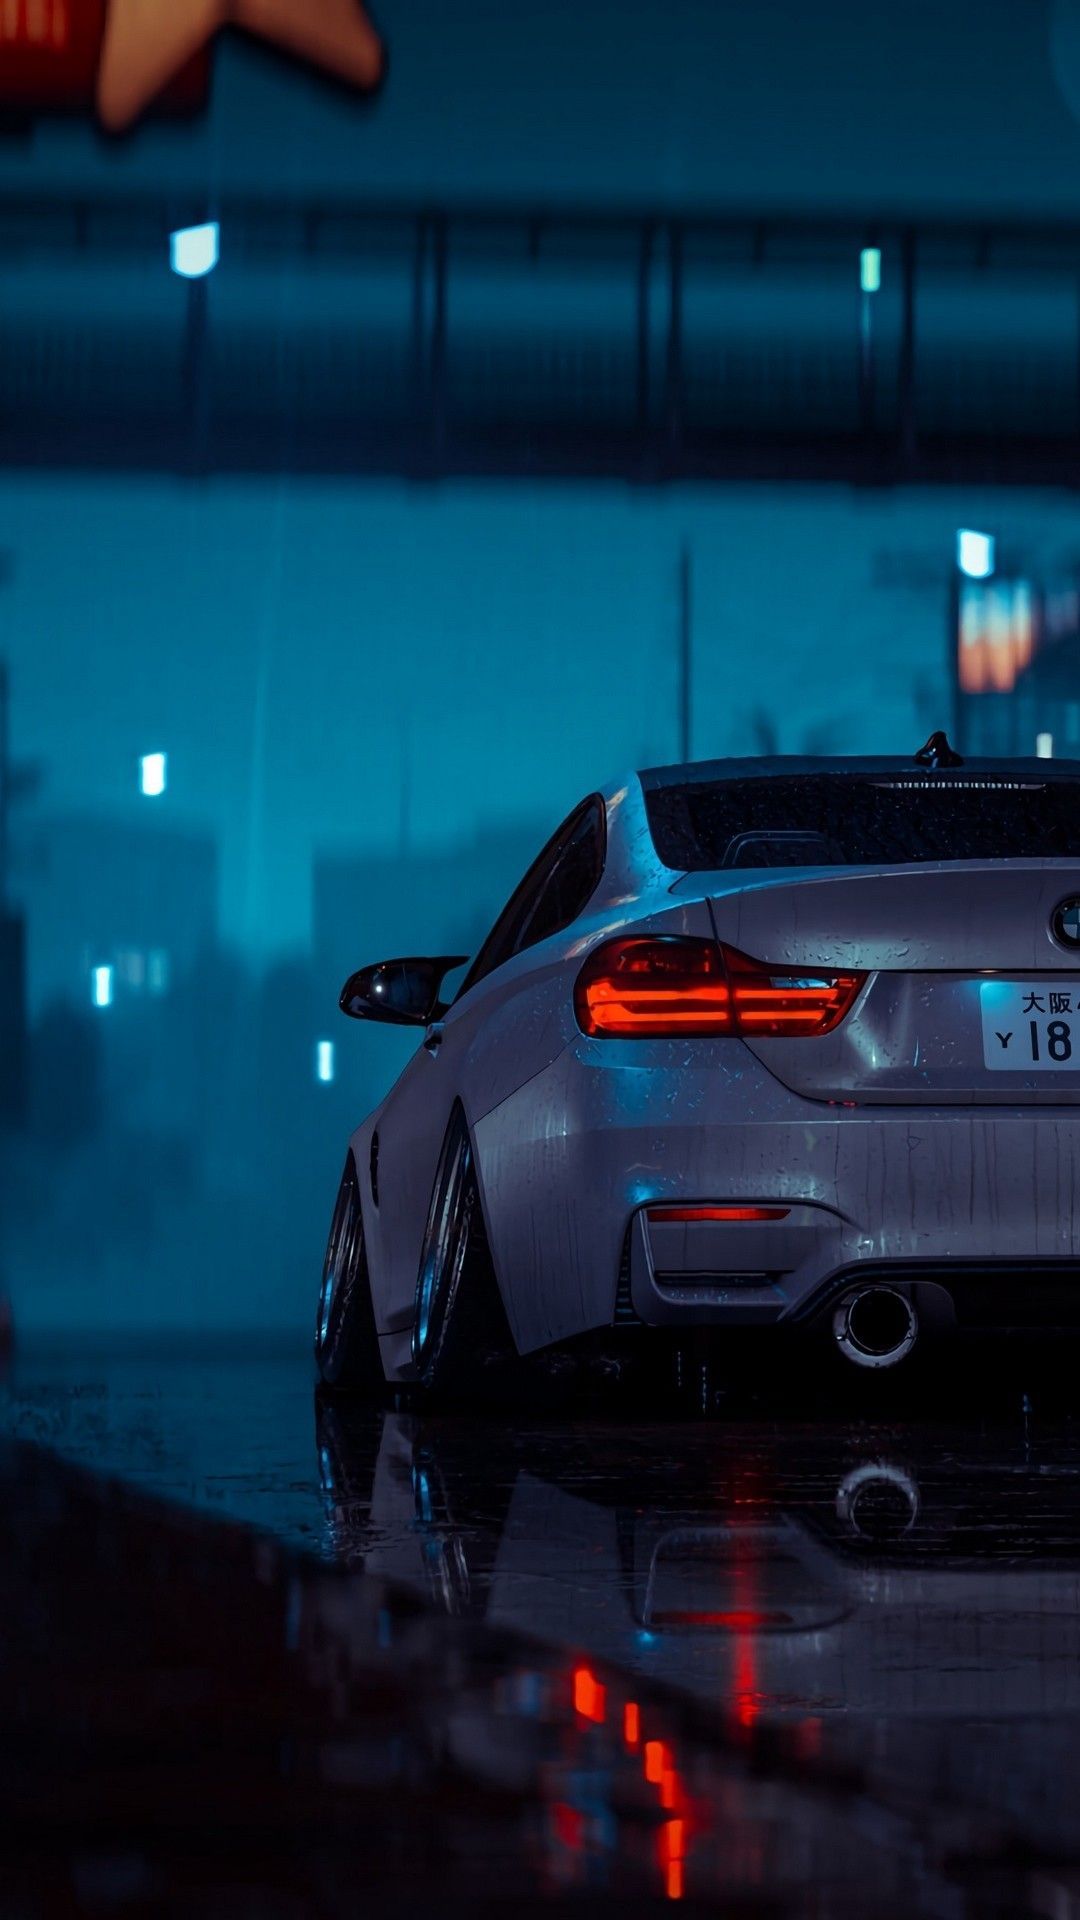 iPhone wallpaper & Android wallpaper. Bmw wallpaper, Dream cars bmw, Bmw m4